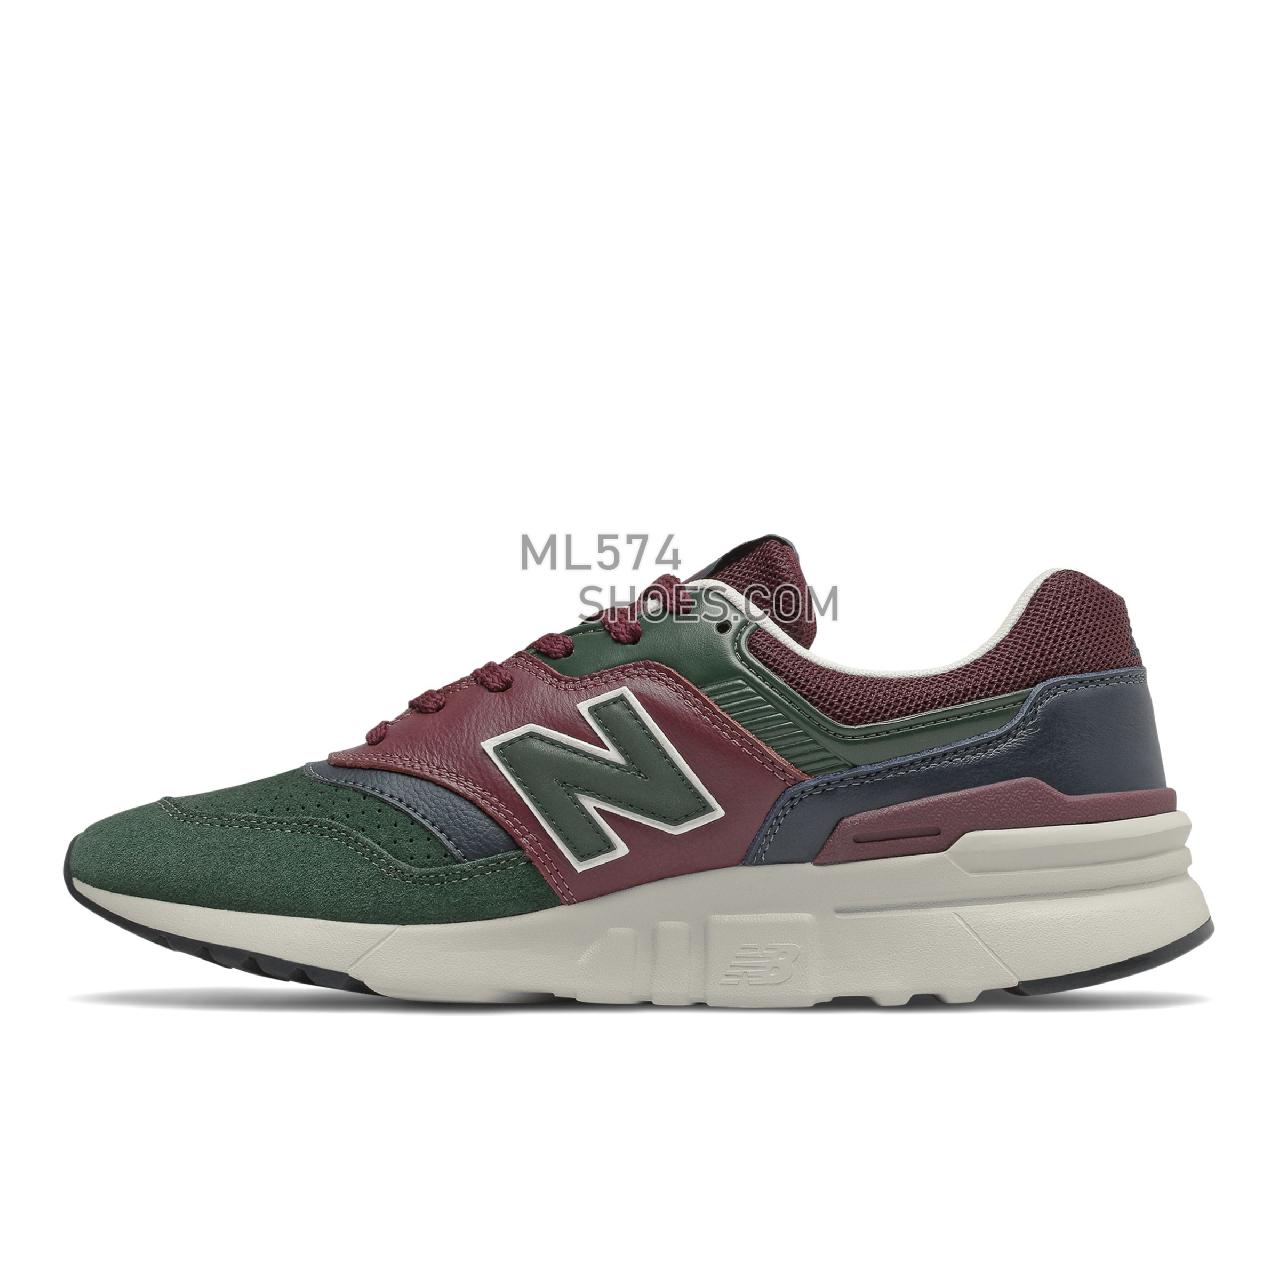 New Balance 997H - Men's Classic Sneakers - Burgundy with Black Emerald - CM997HWA